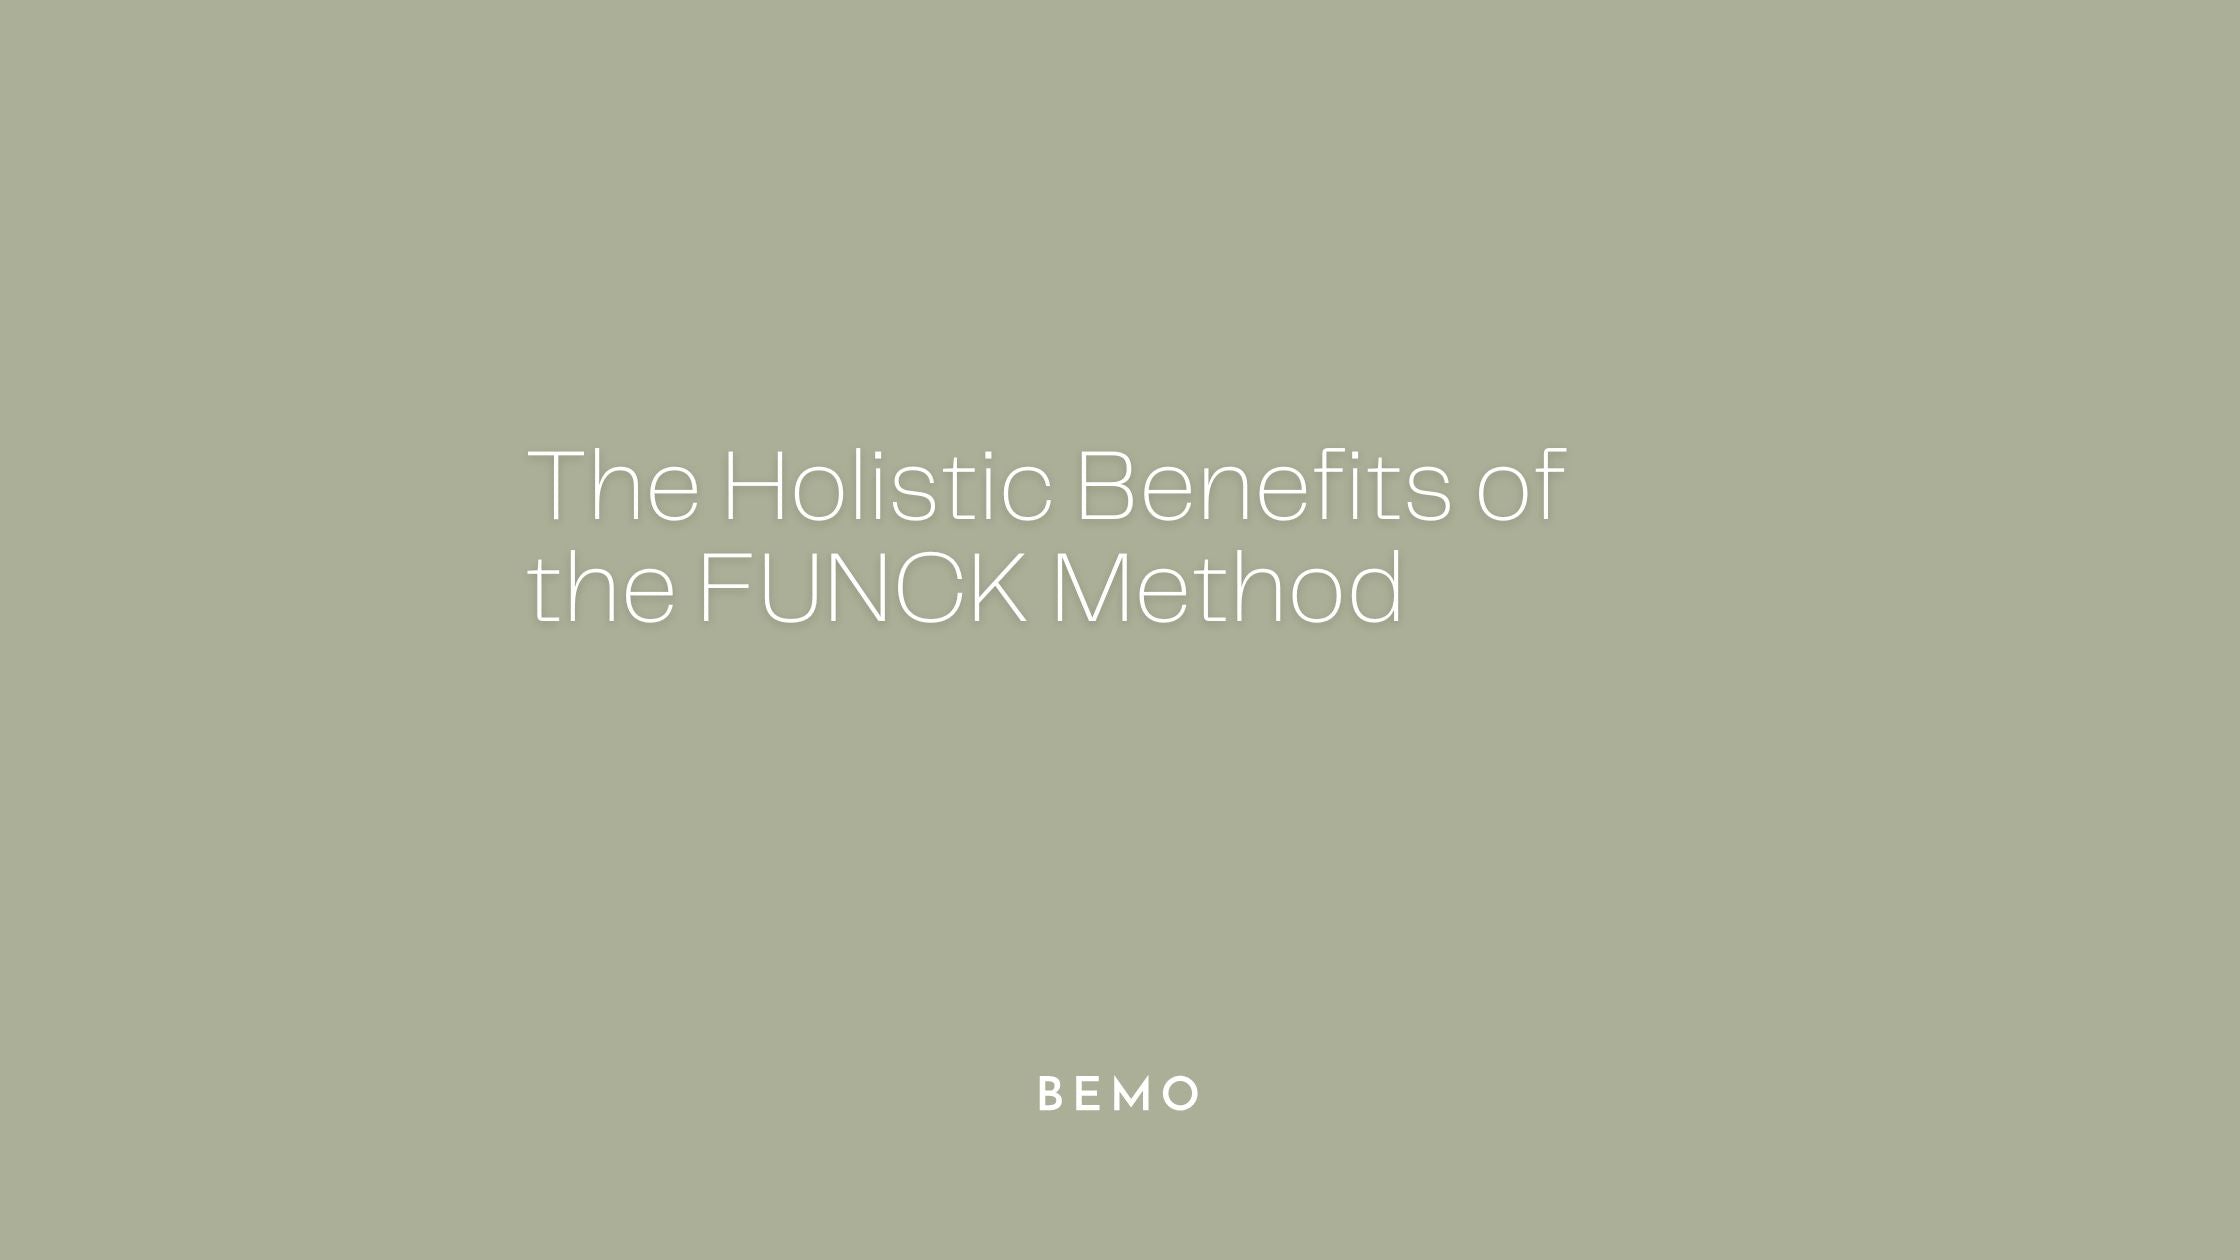 The Holistic Benefits of the FUNCK Method